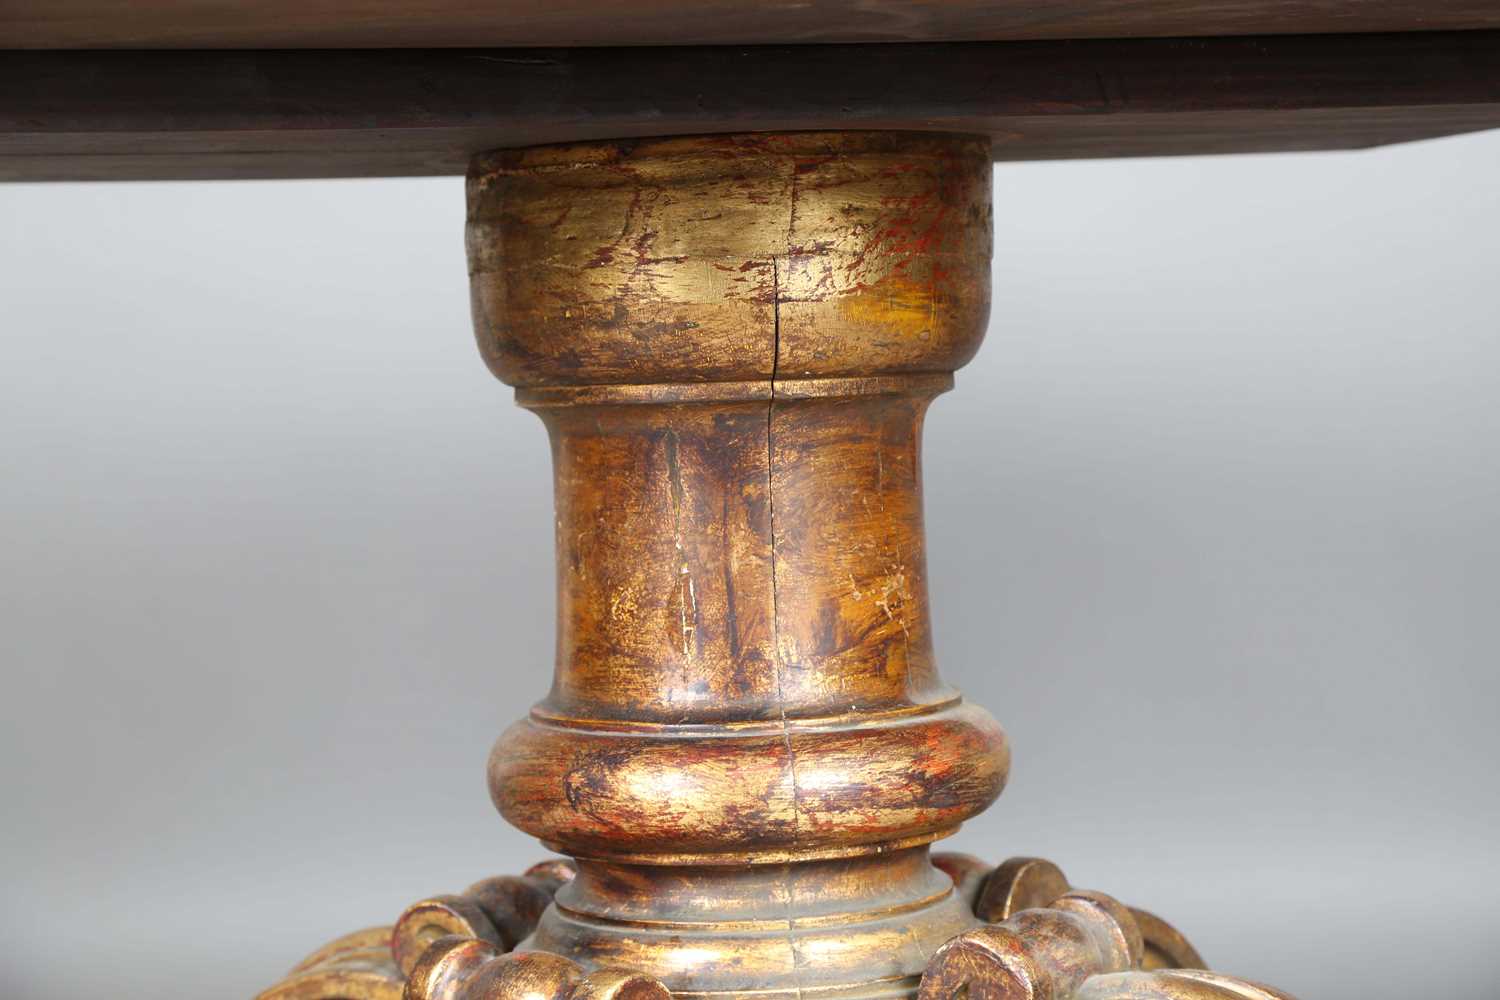 A 19th century giltwood table base with a later removable top, the base carved with scrolling legs - Image 6 of 10